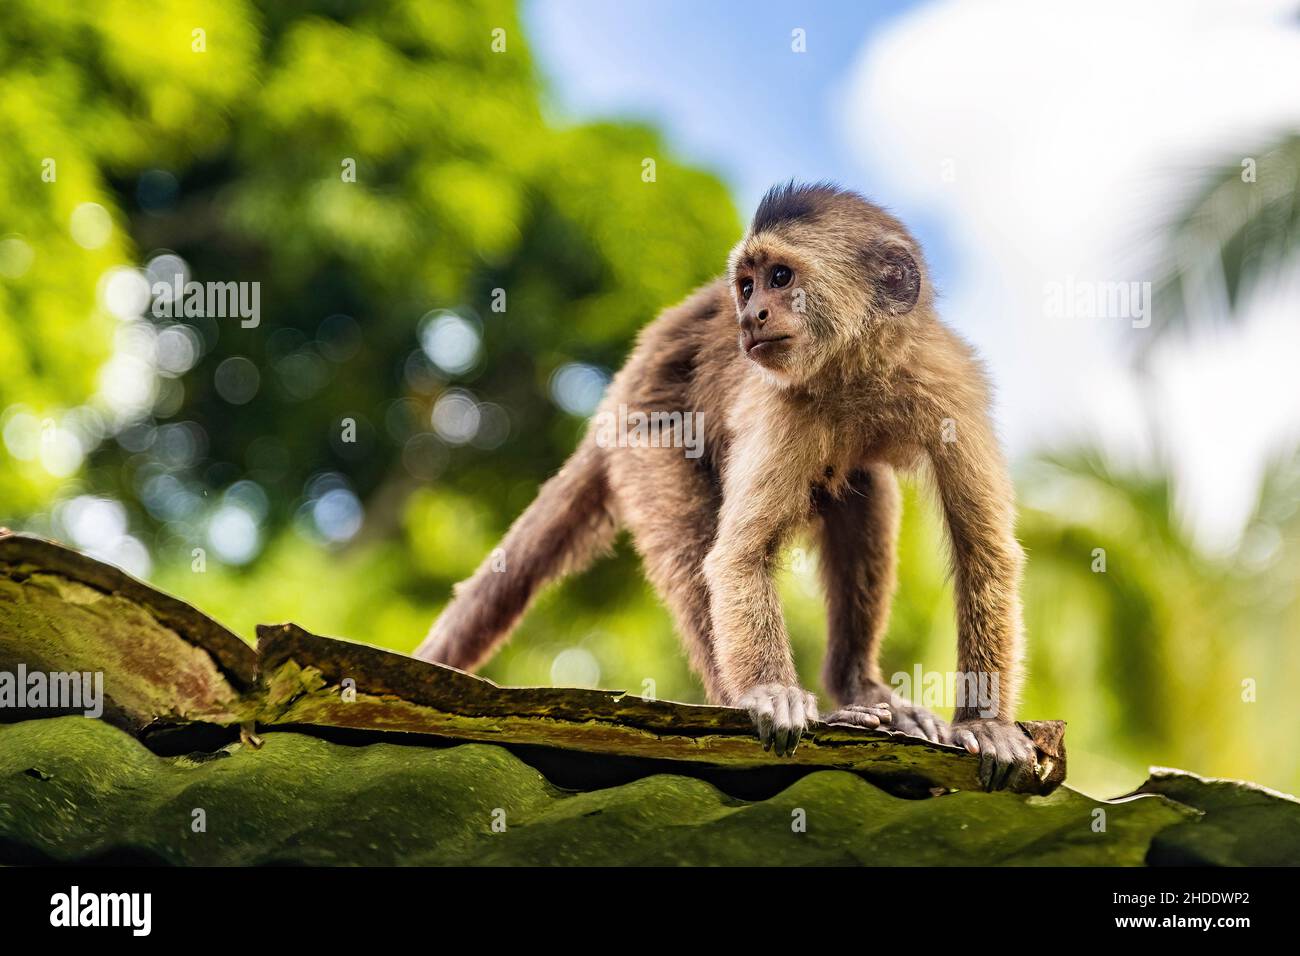 Cute capuchin wild monkey on the roof at day Stock Photo